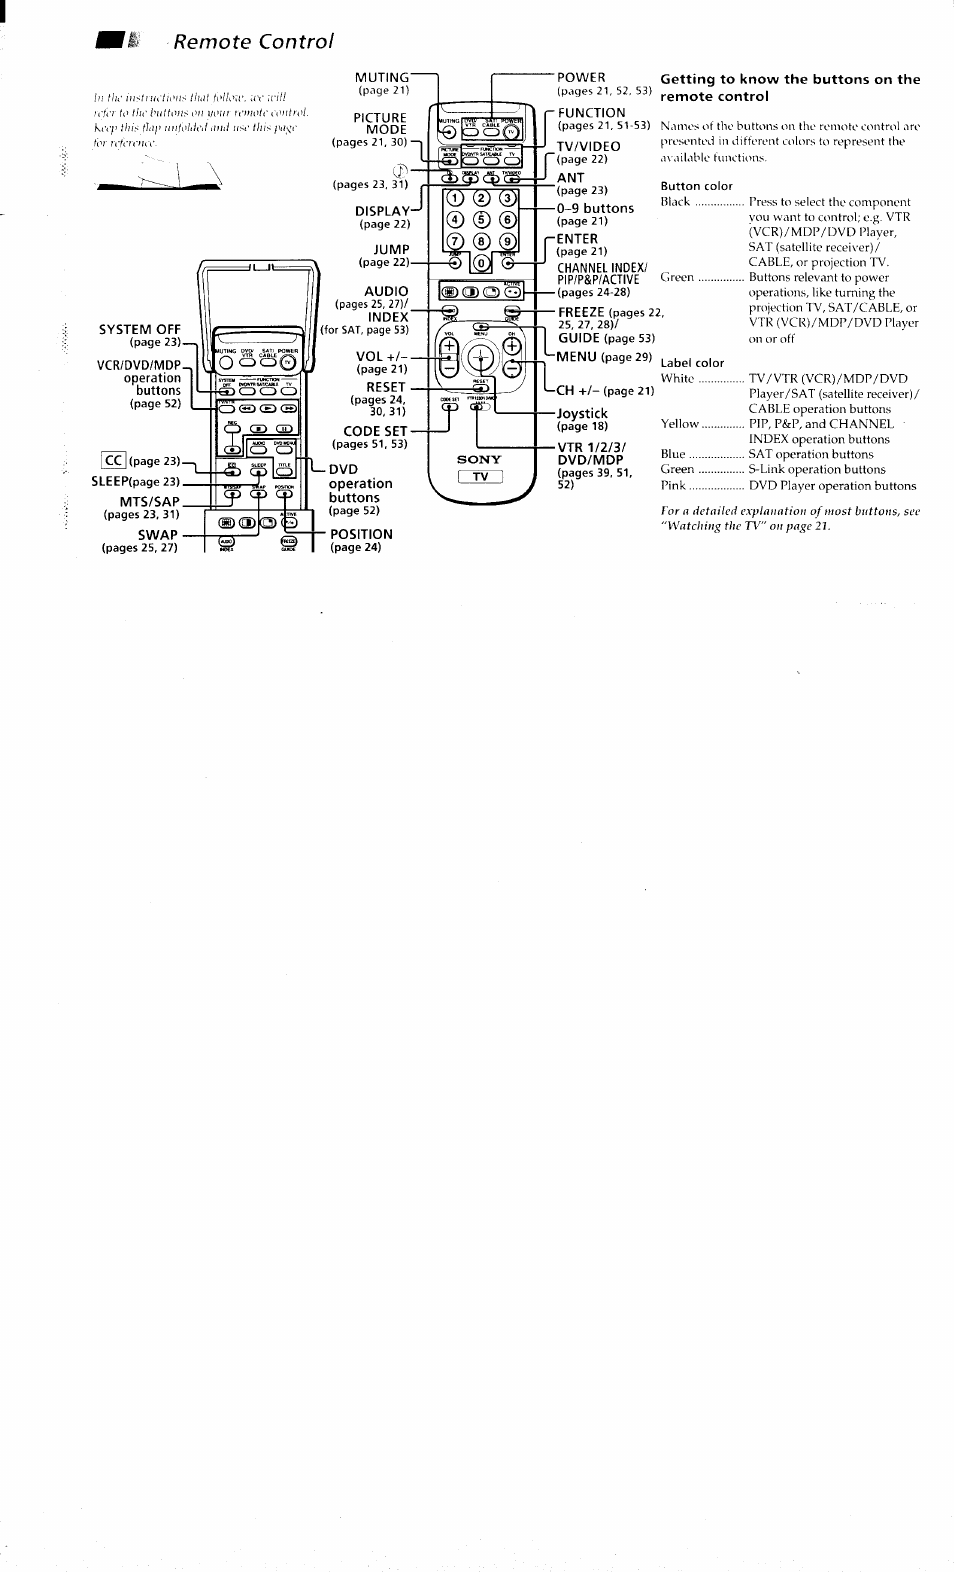 Remote control, System off, Mts/sap | Swap, Muting, Picture, Mode, Display, Jump, Audio | Sony KP-48V80 User Manual | Page 3 / 62